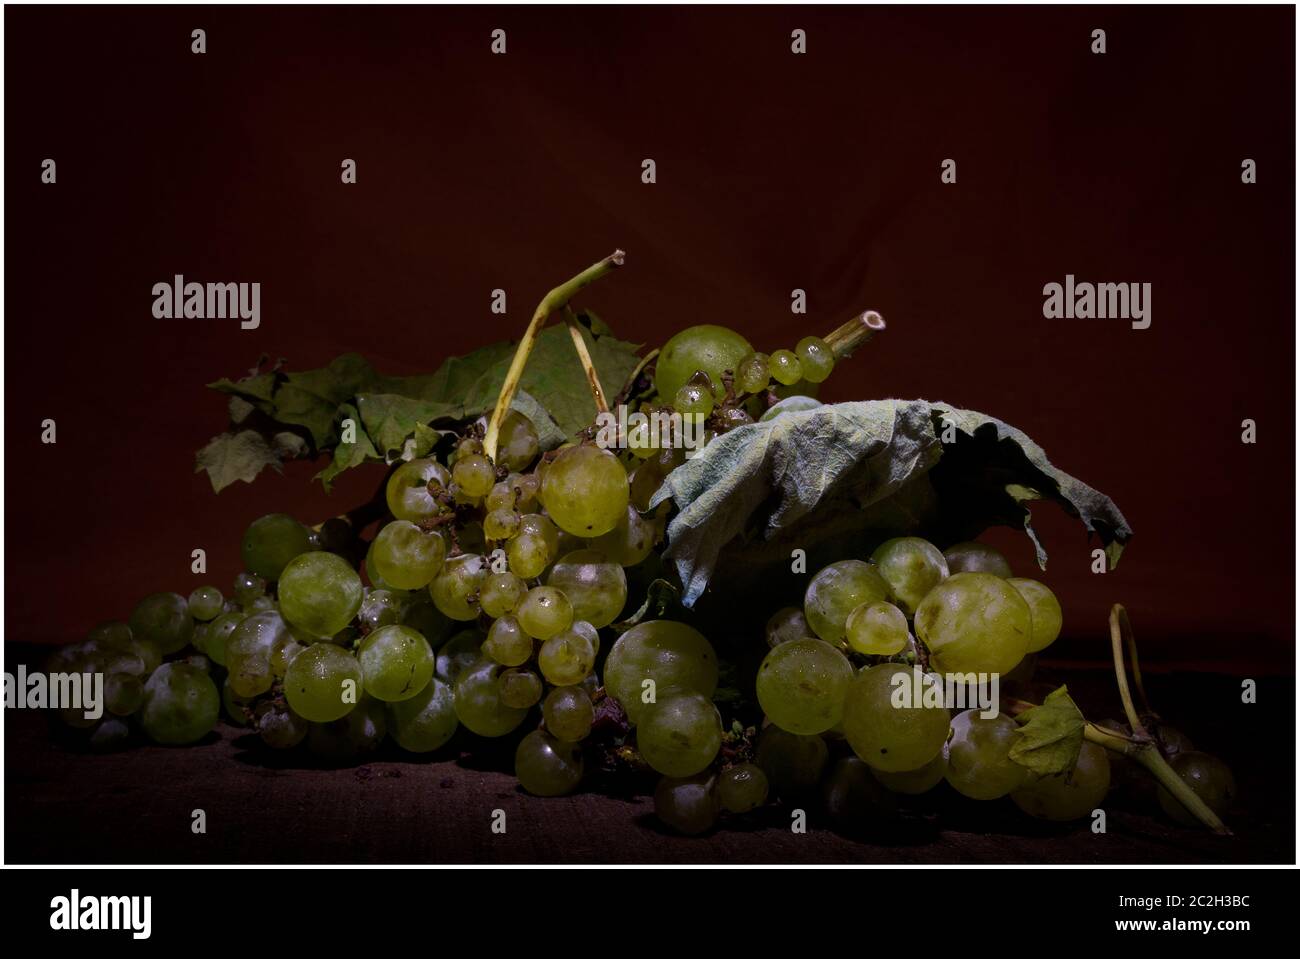 Grapes photographed with the light painting technique Stock Photo